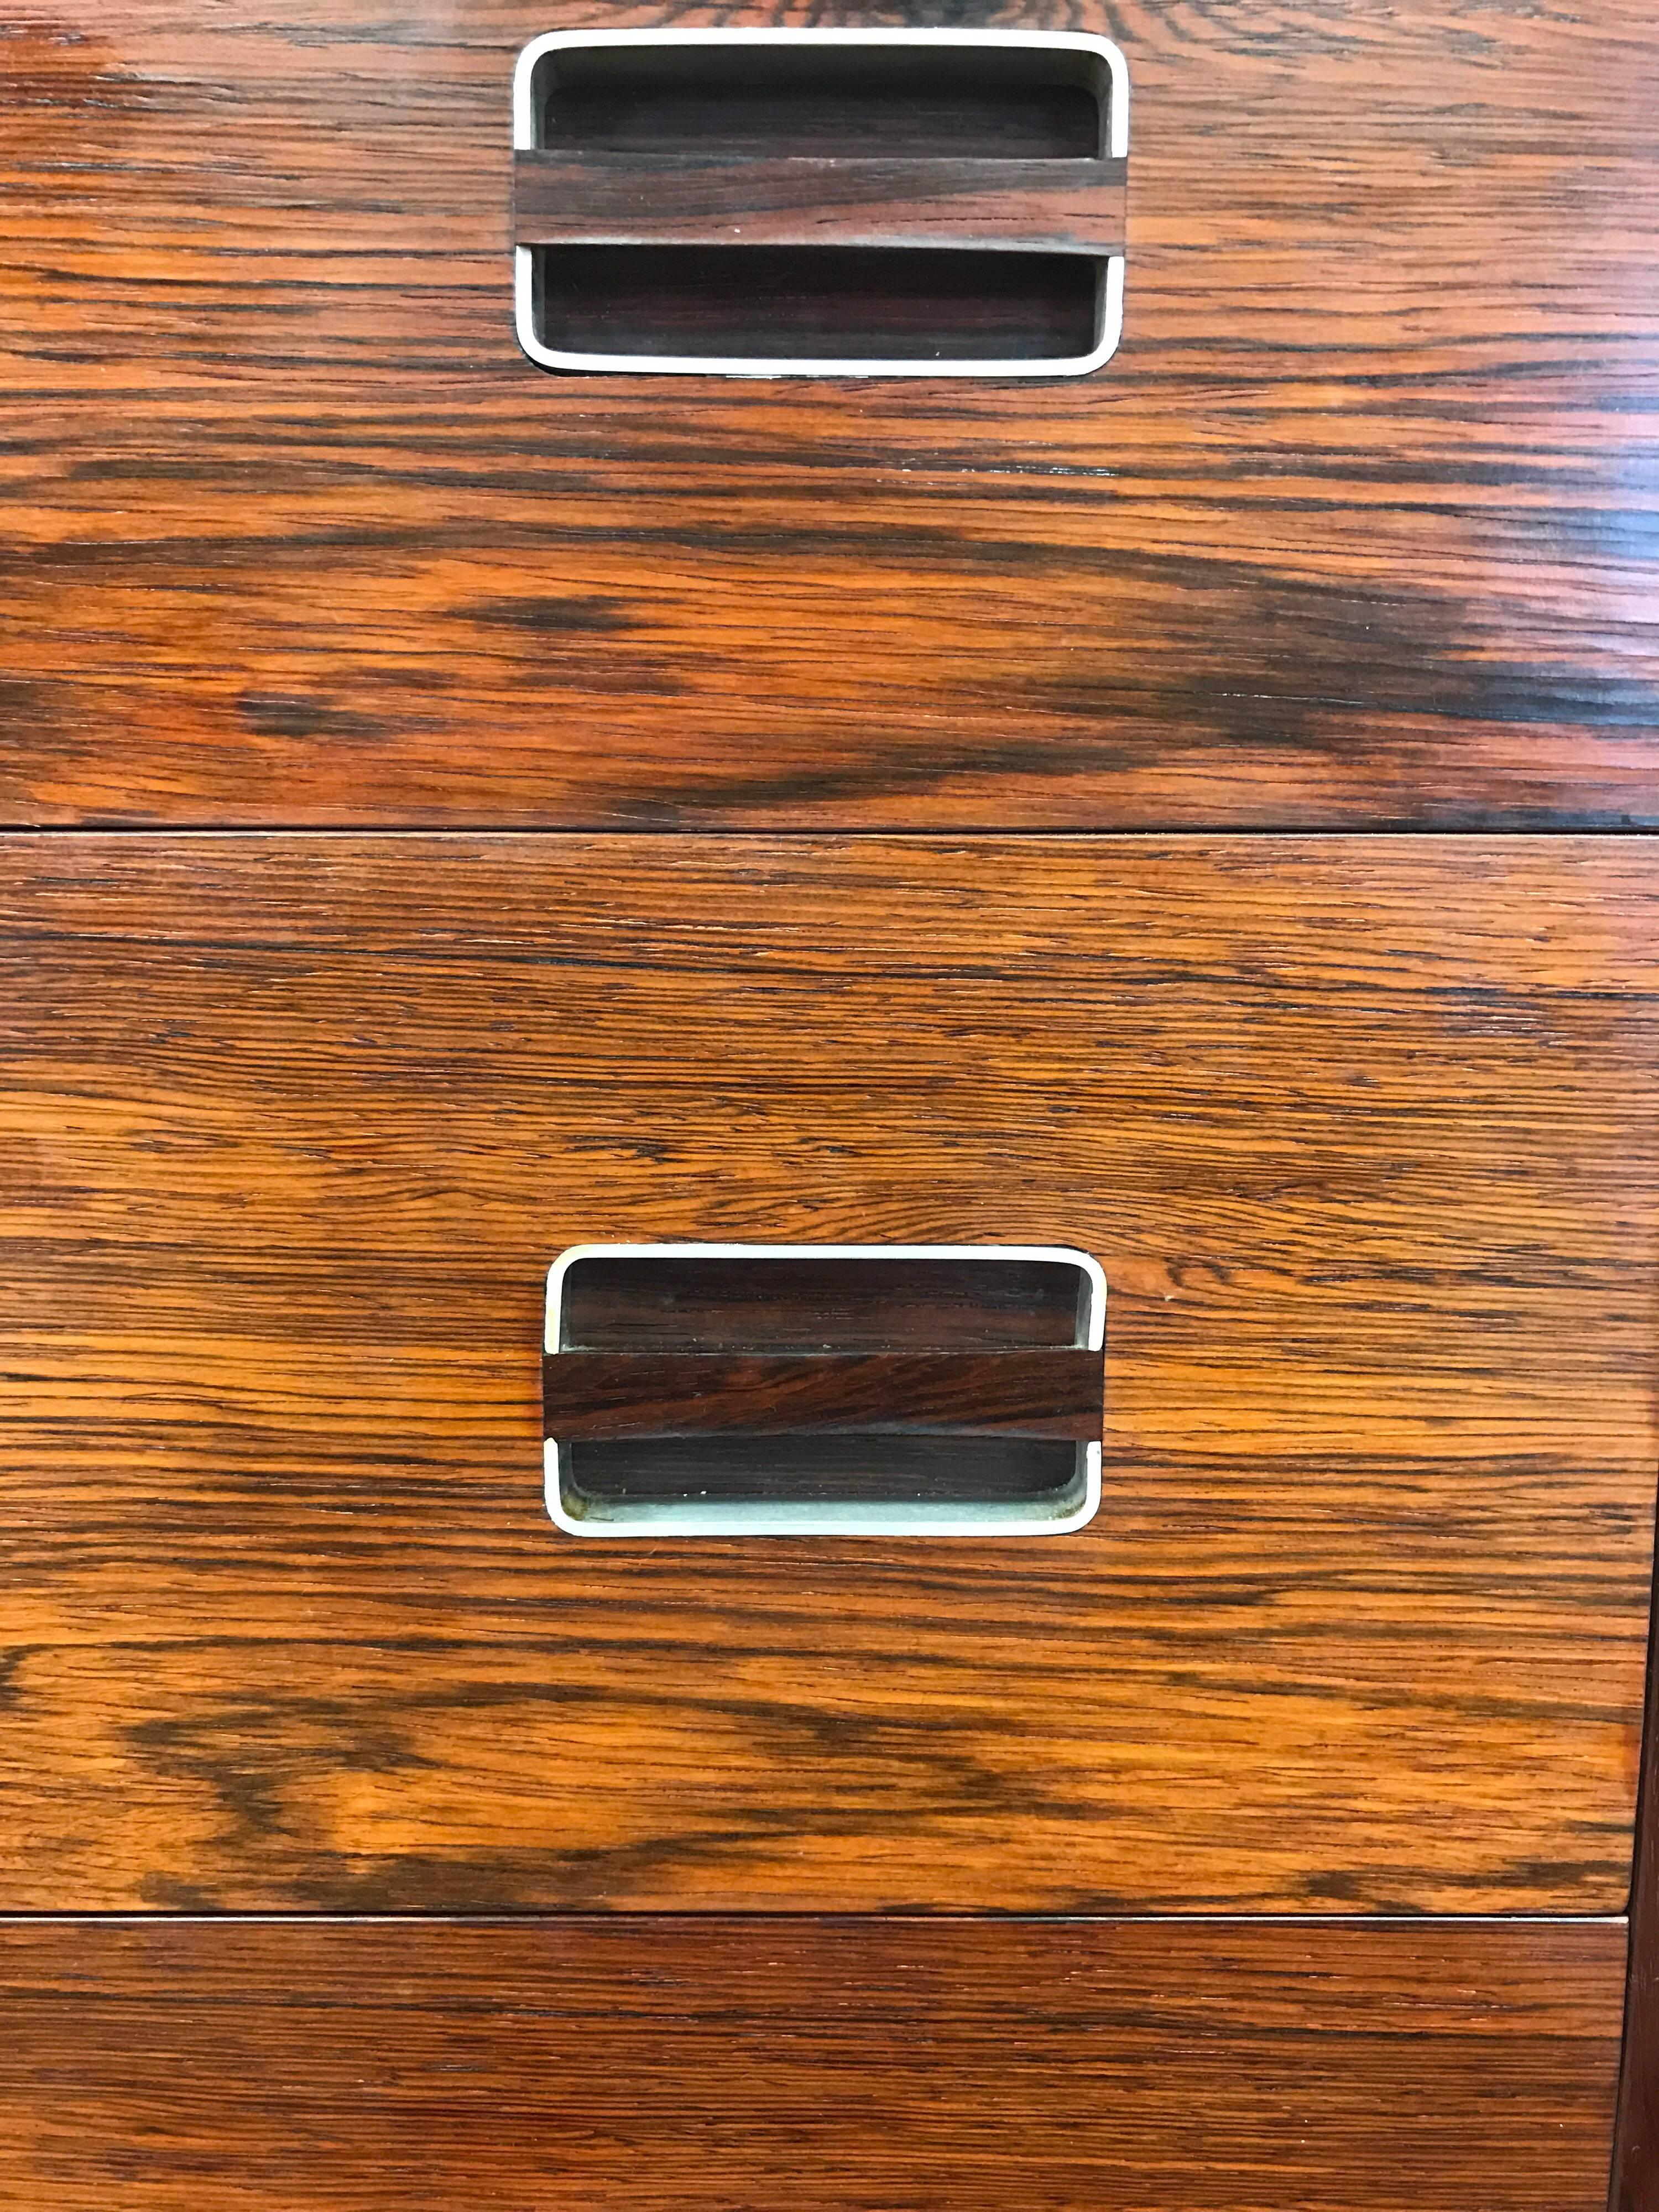 Midcentury rosewood five drawer tall chest of drawers by Dyrlund. Features beautiful wood graining and inset metal pulls. All vendor hallmarks are present.